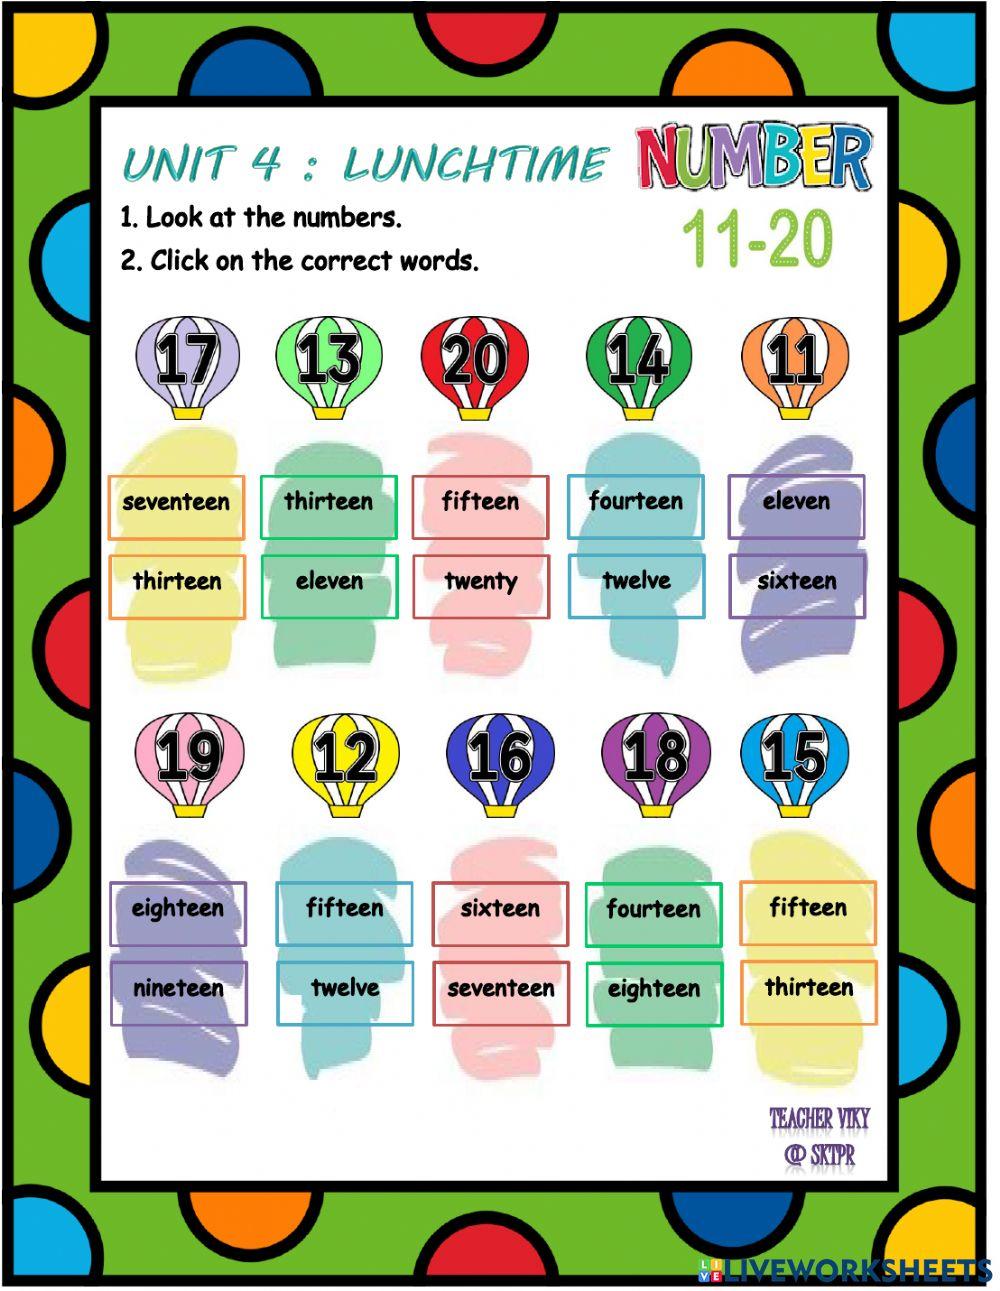 Unit 4 Lunchtime (11-20 Numbers)